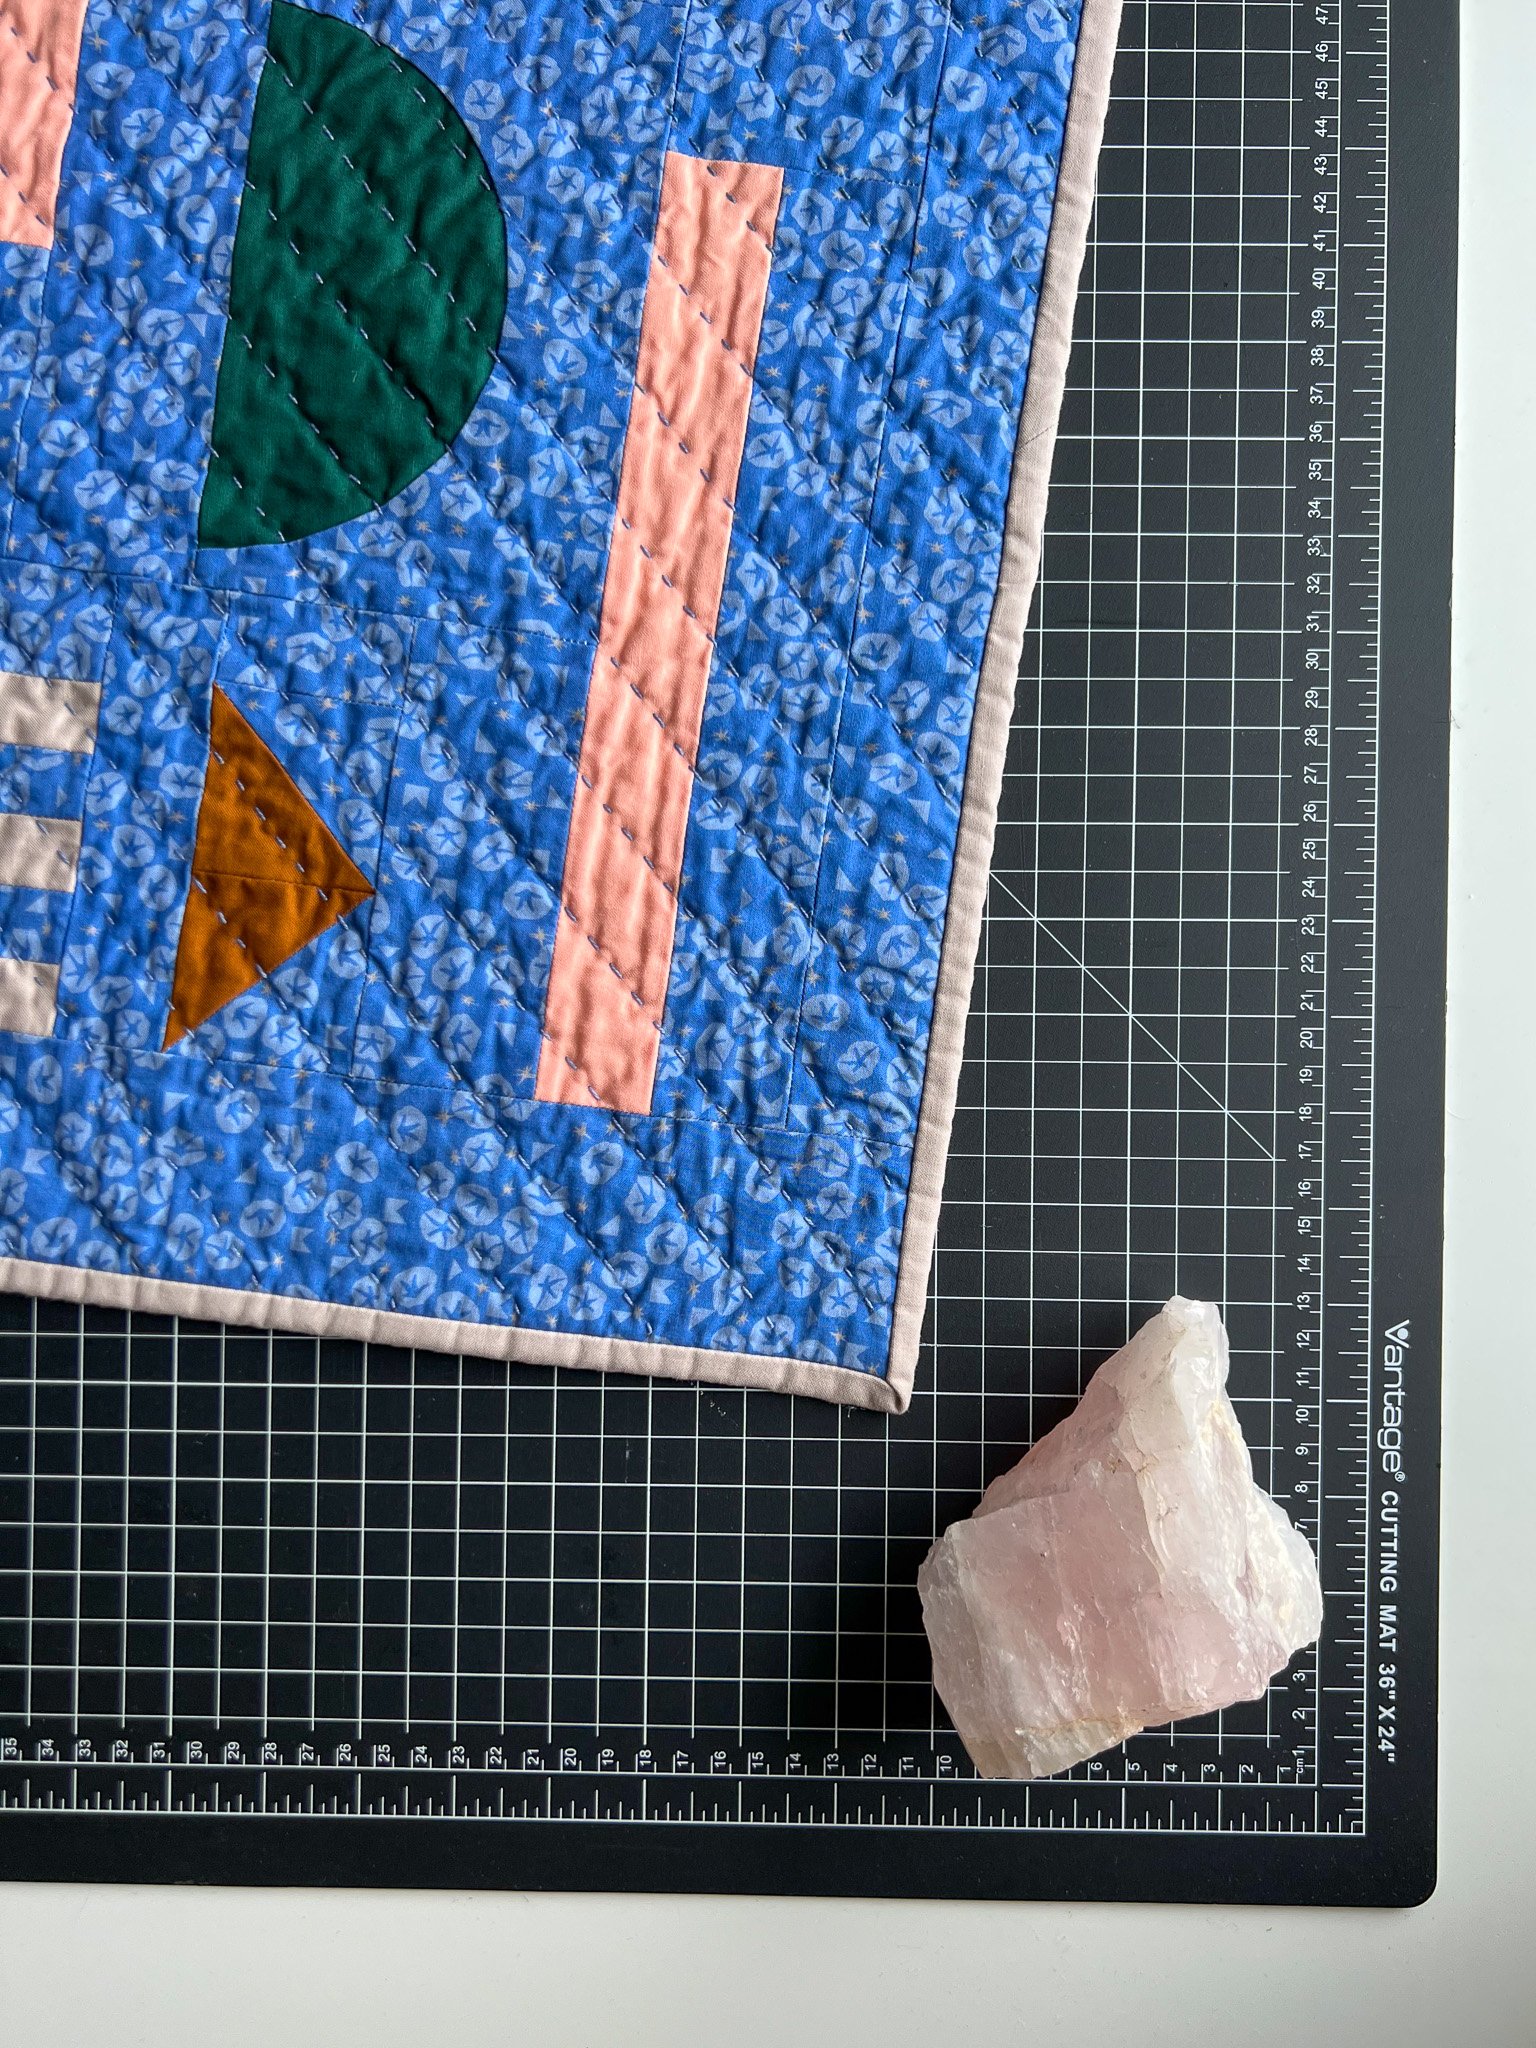 Create Your Own Mini Quilt with the Fenrir Pattern